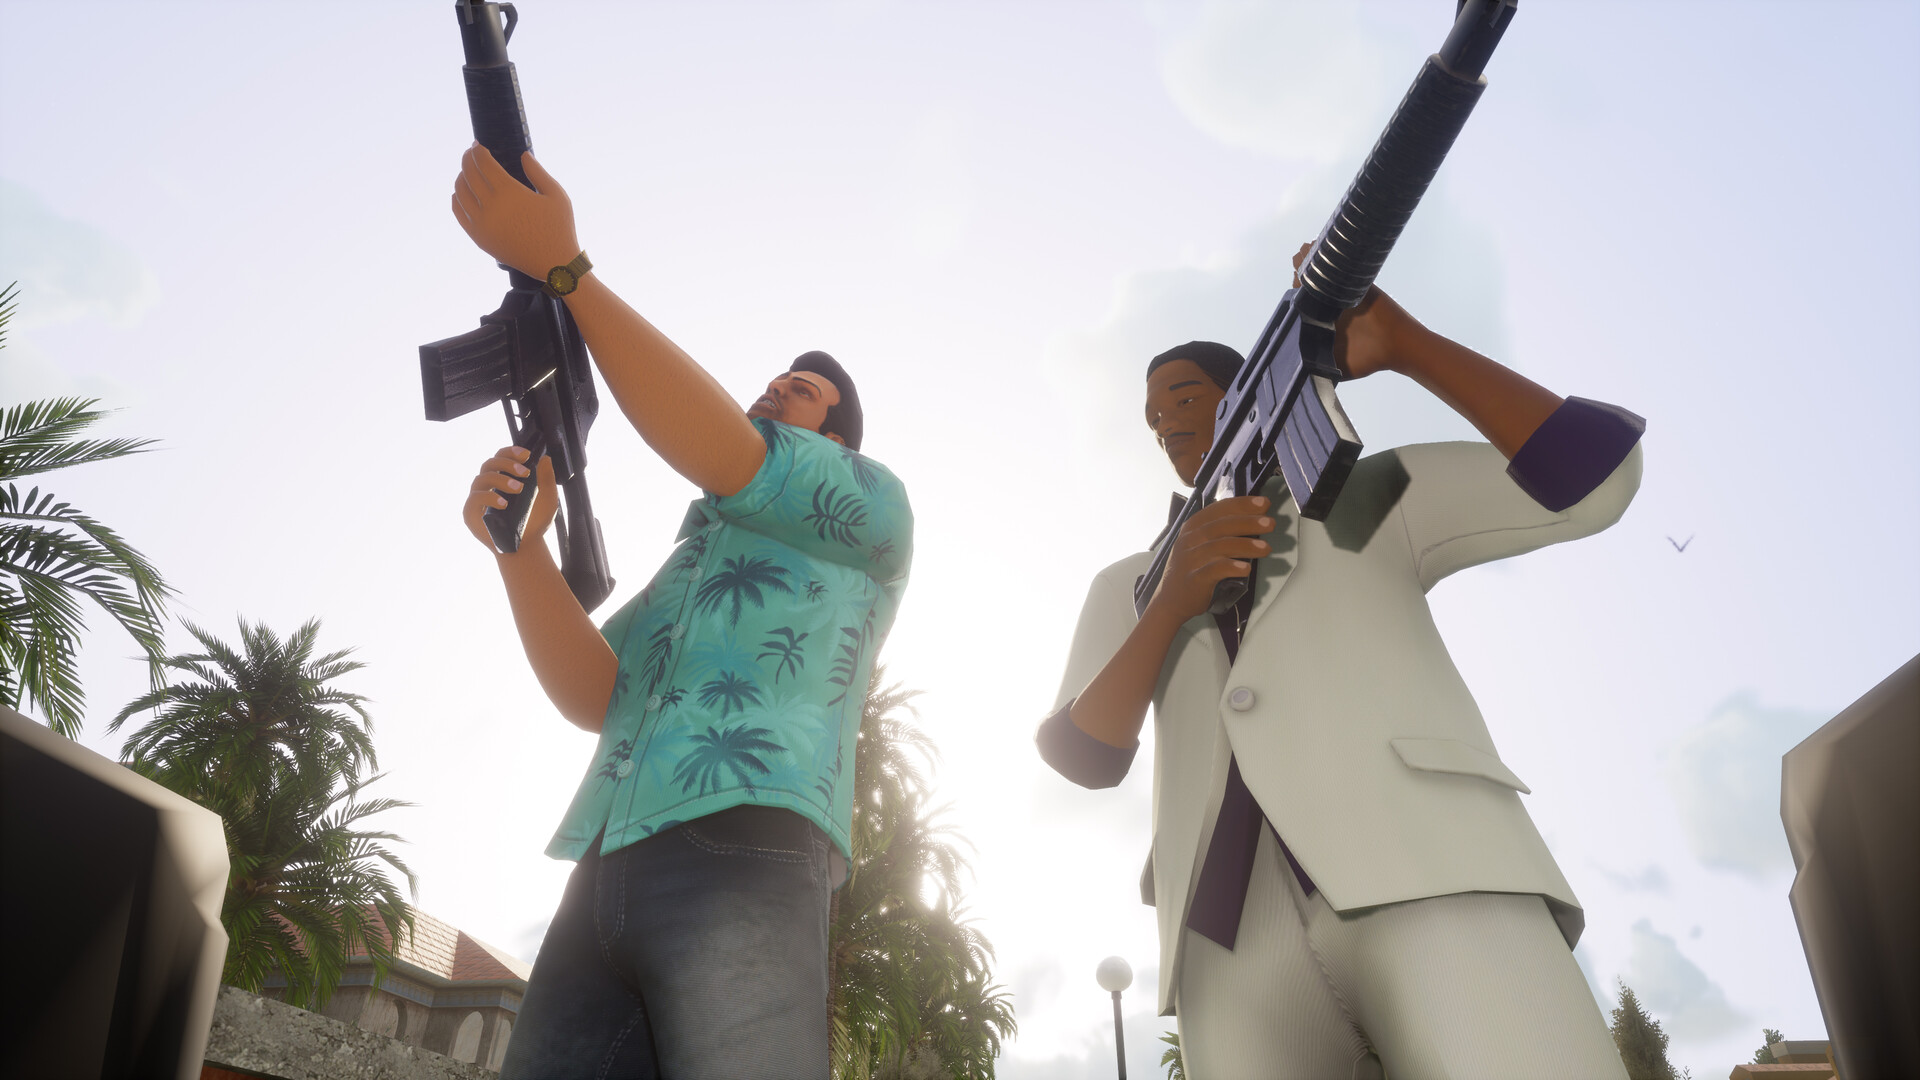 Grand Theft Auto: Vice City – The Definitive Edition Featured Screenshot #1